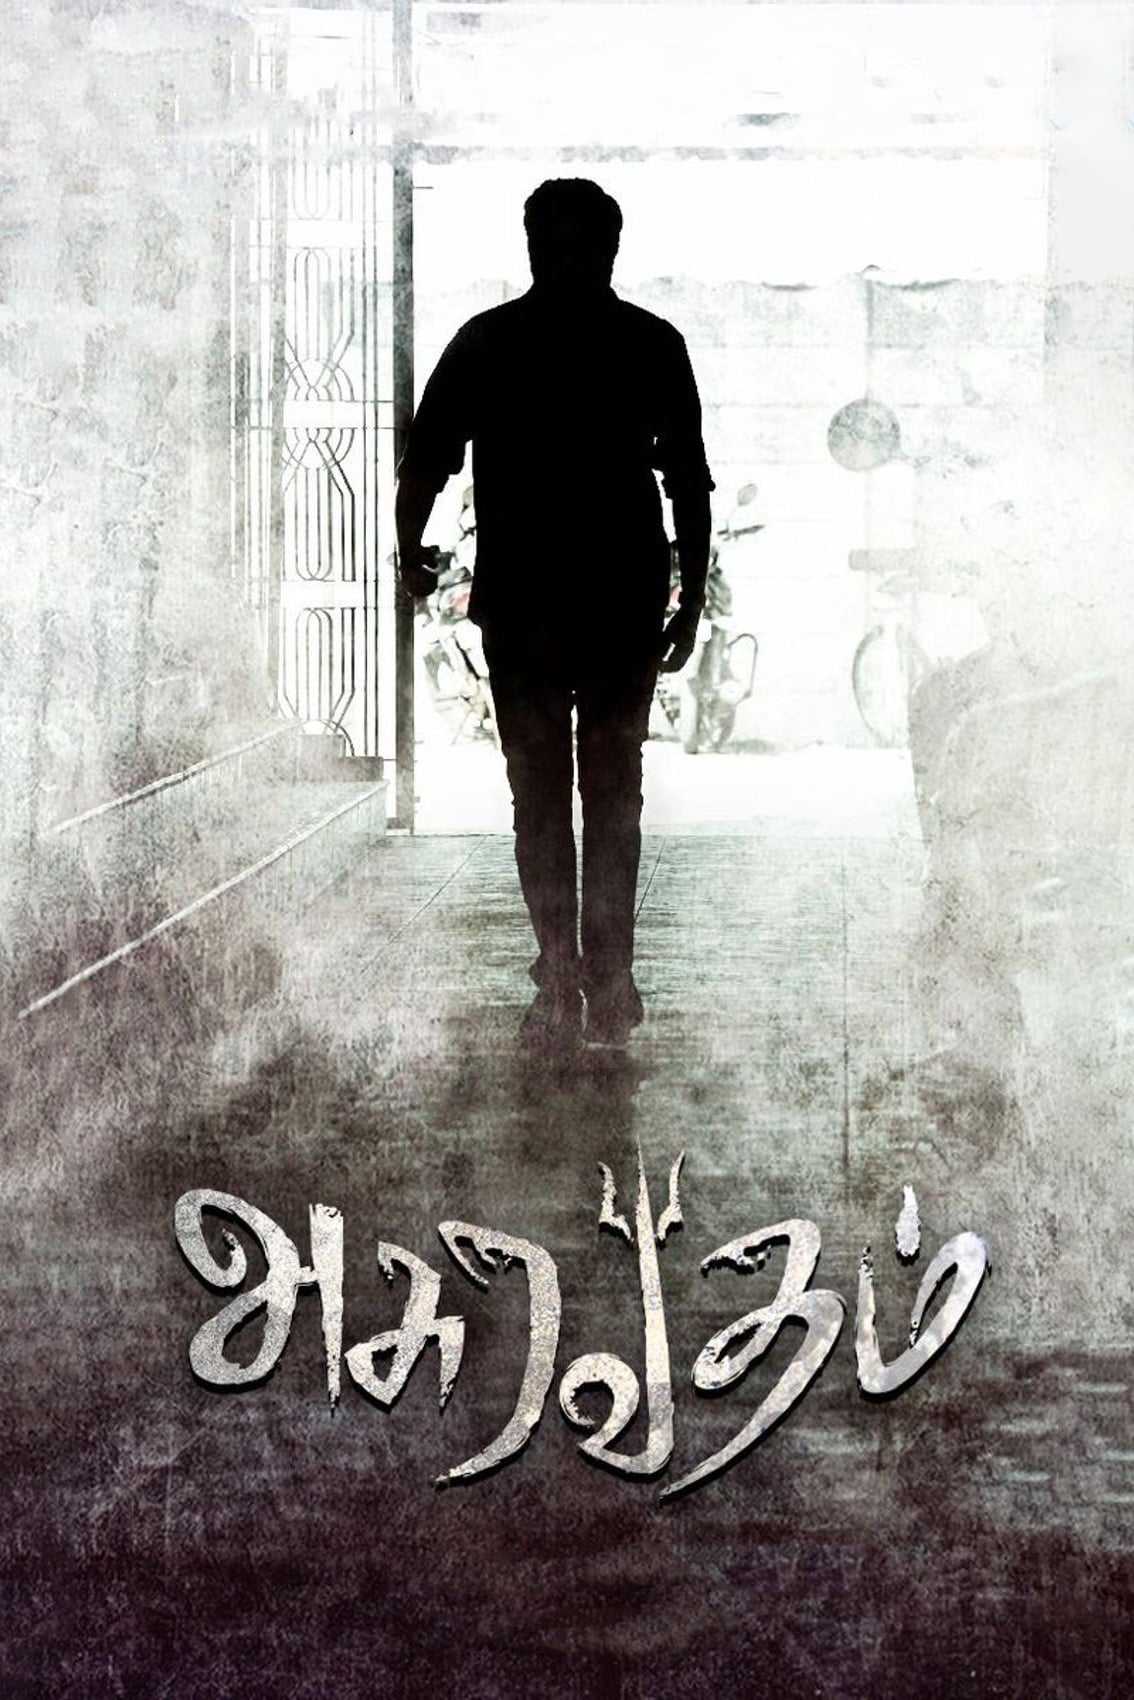 Poster for the movie "Asuravadham"